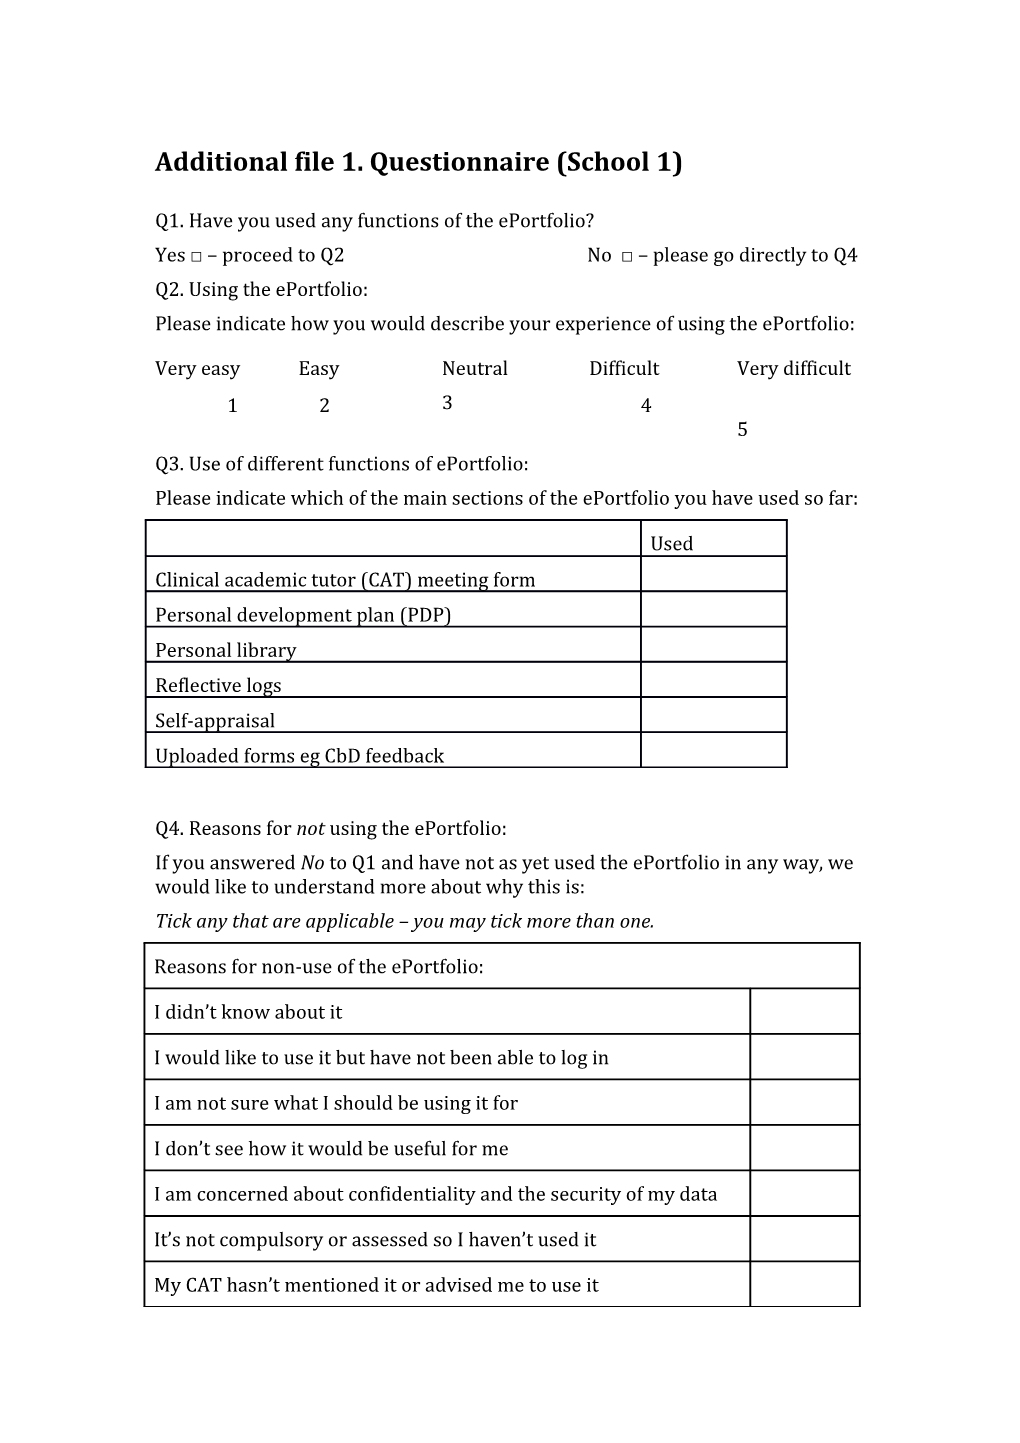 Additional File 1. Questionnaire (School 1)